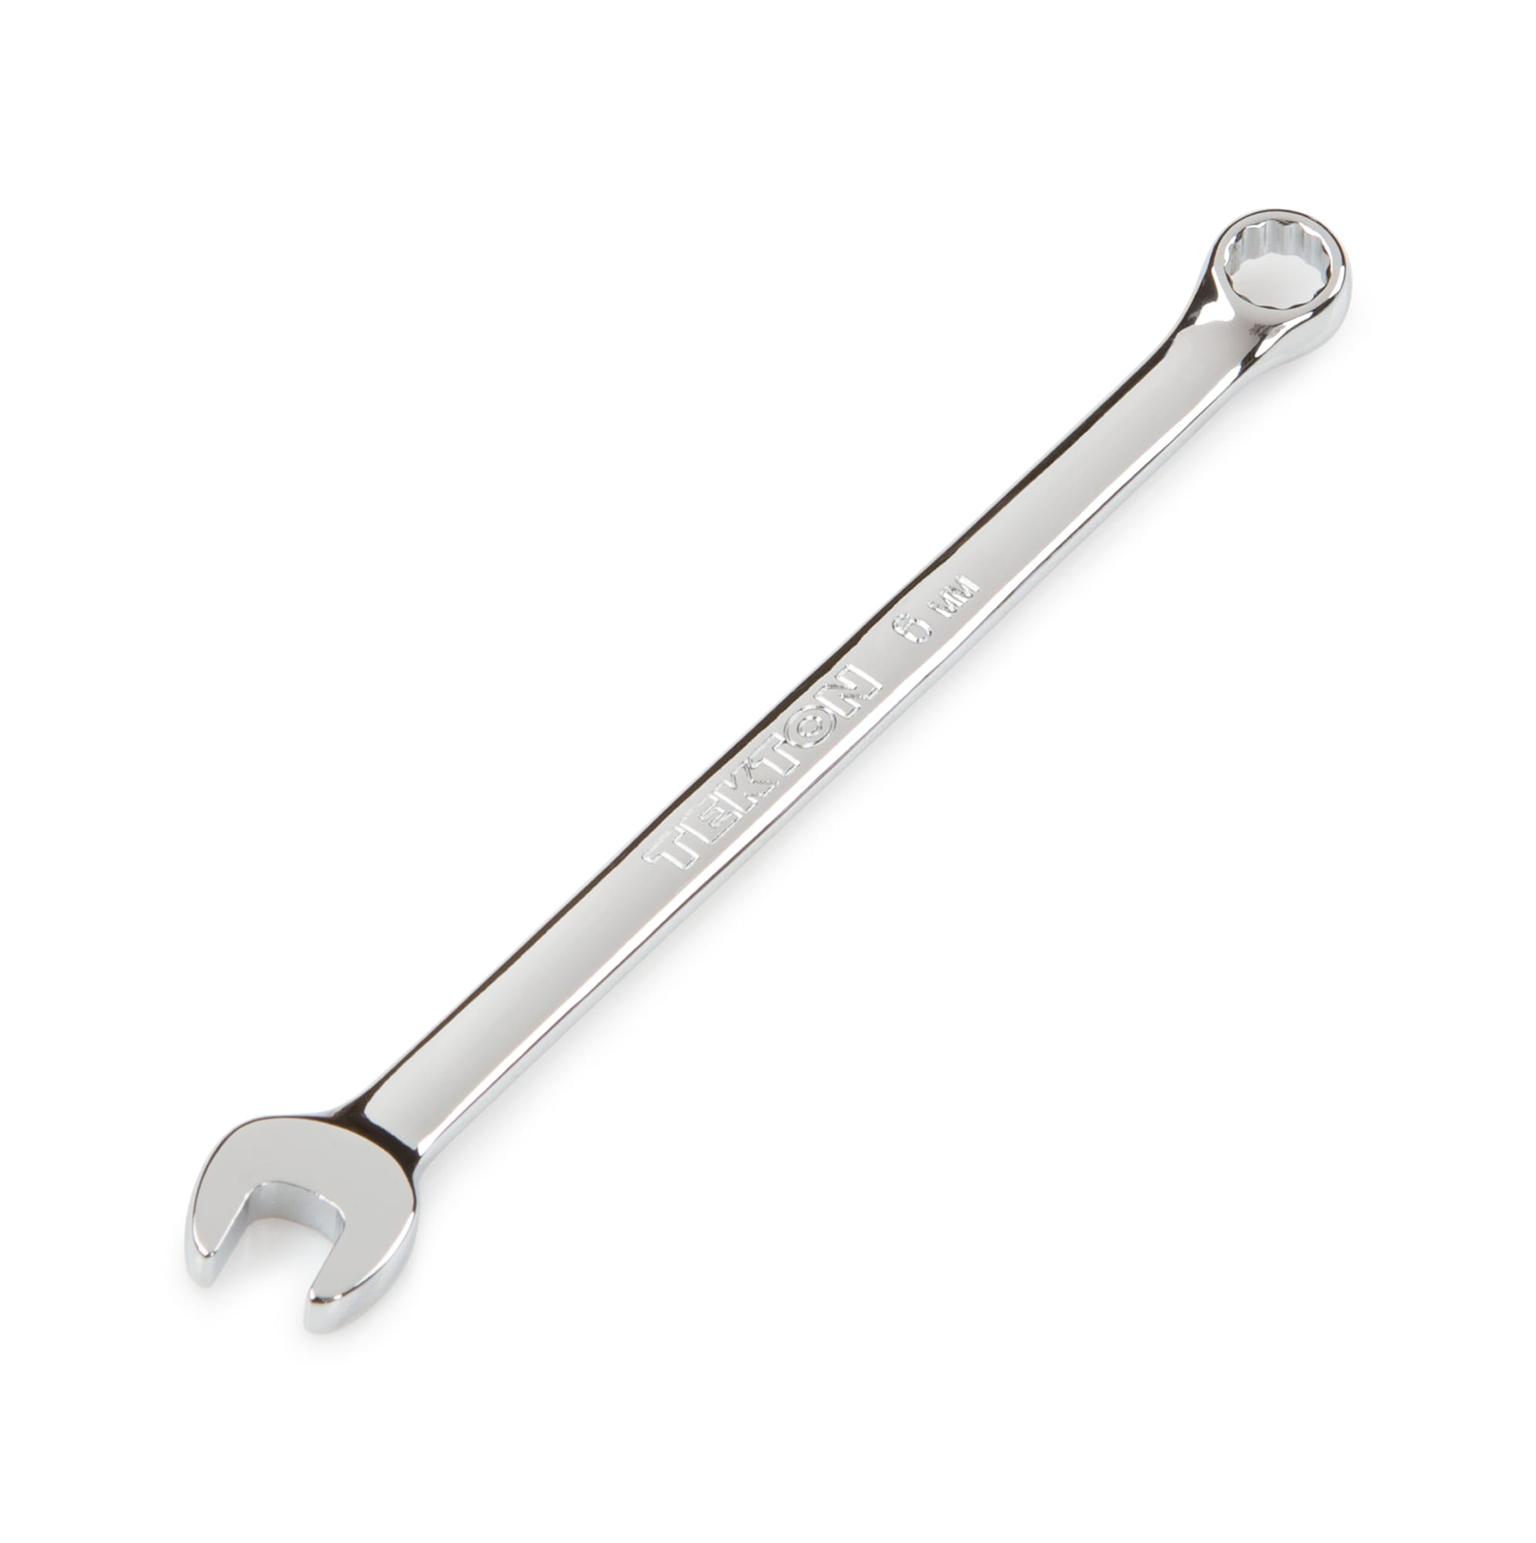 TEKTON 18275-T 6 mm Combination Wrench